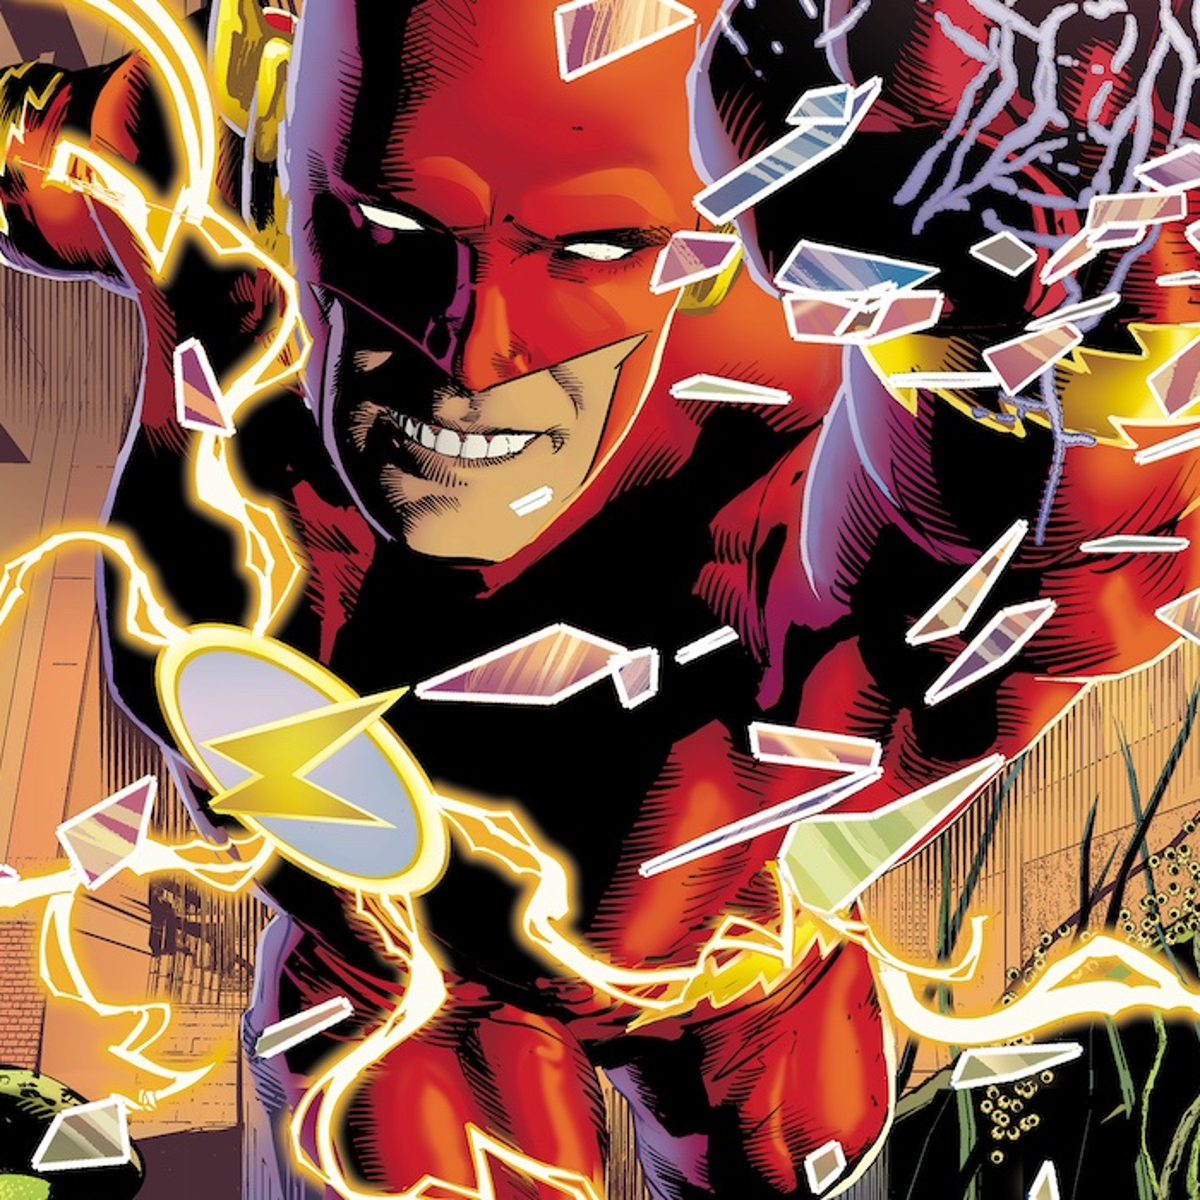 The Flash: Take a look at the new covers (and some interior pages!) from  Wally West's new Dawn of DC series